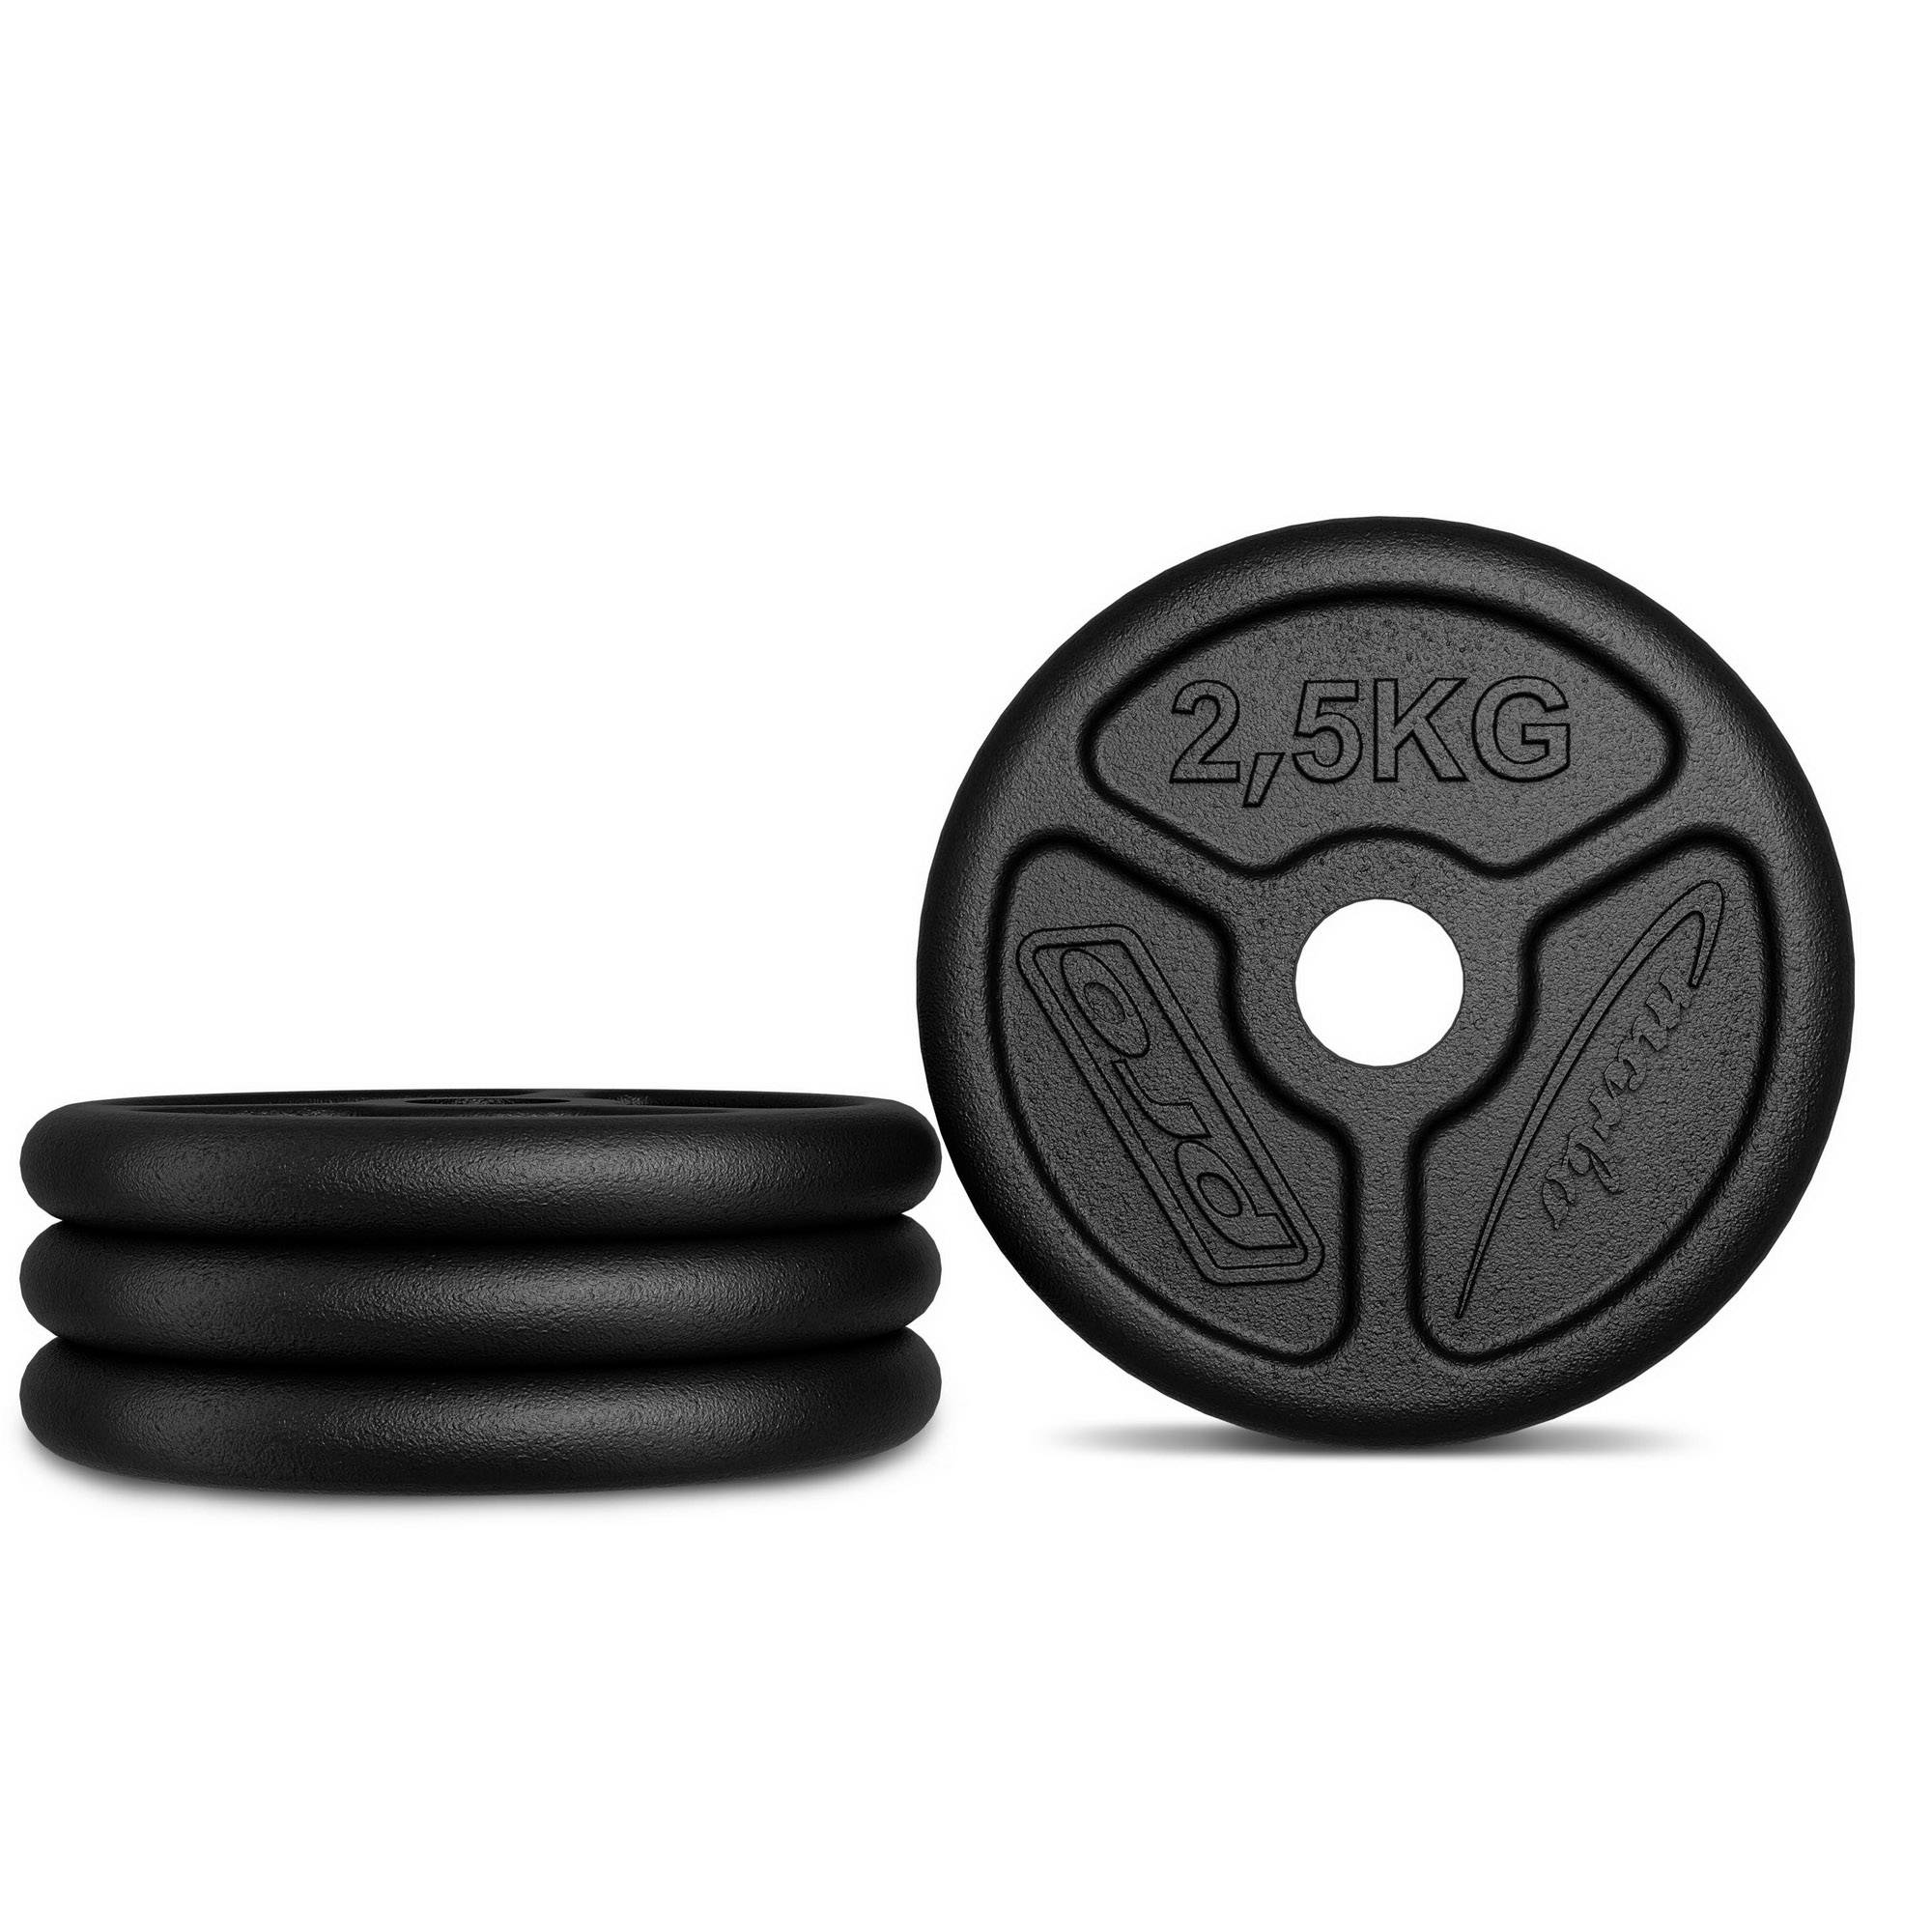 | weight \\ Week Standard kg Weight iron Marbo plates ø31 bore Standard 2.5 kg plates MW-O2,5-slim discs - with \\ Sport and Weight Bars 2,5 Week slim Cyber 2023 Black 2023 Plates mm